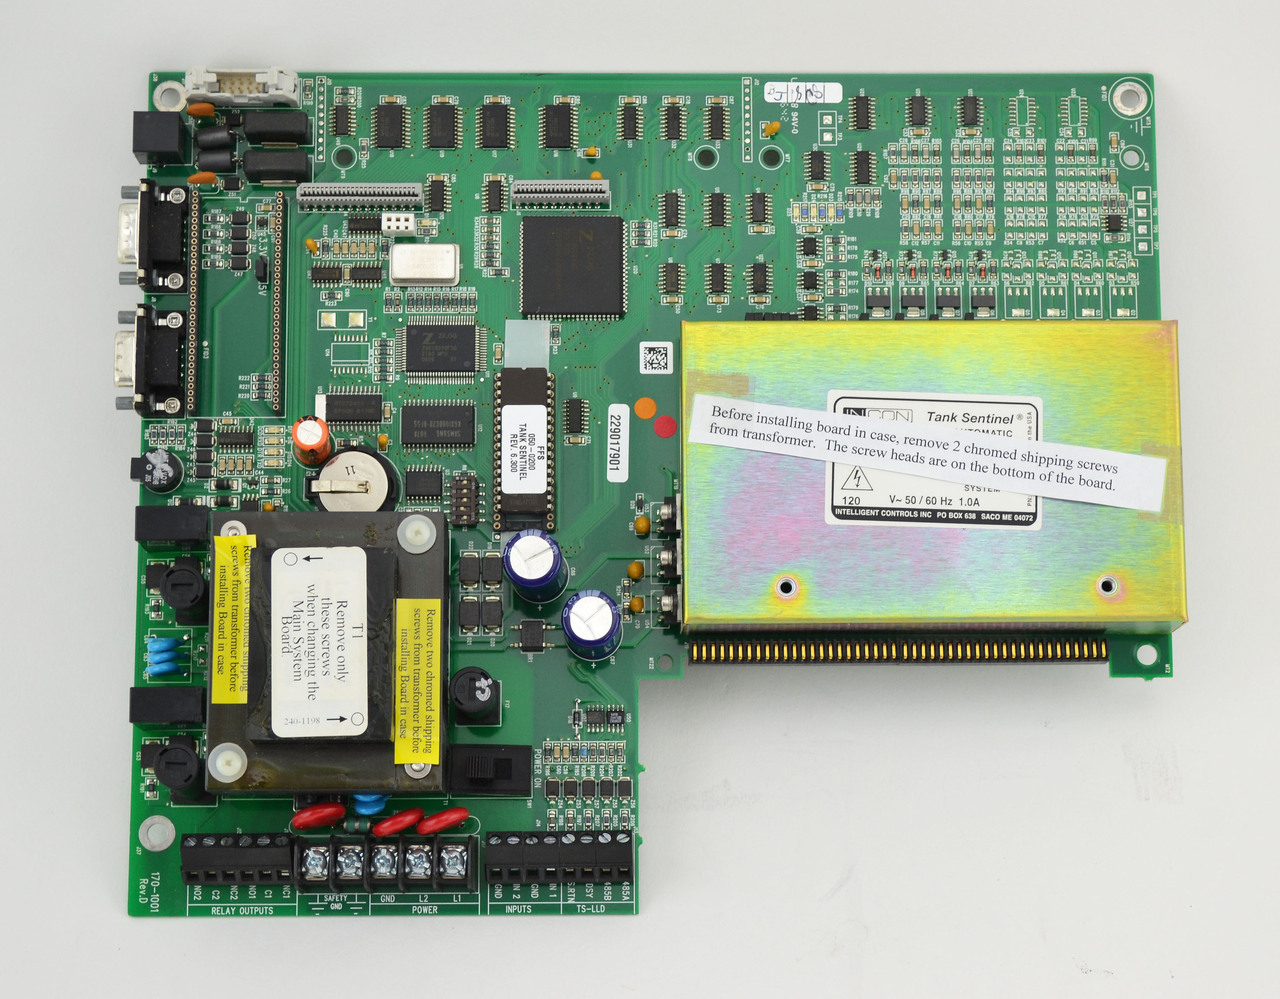 TS-1001 MAIN SYSTEM BOARD, Fits Incon Image